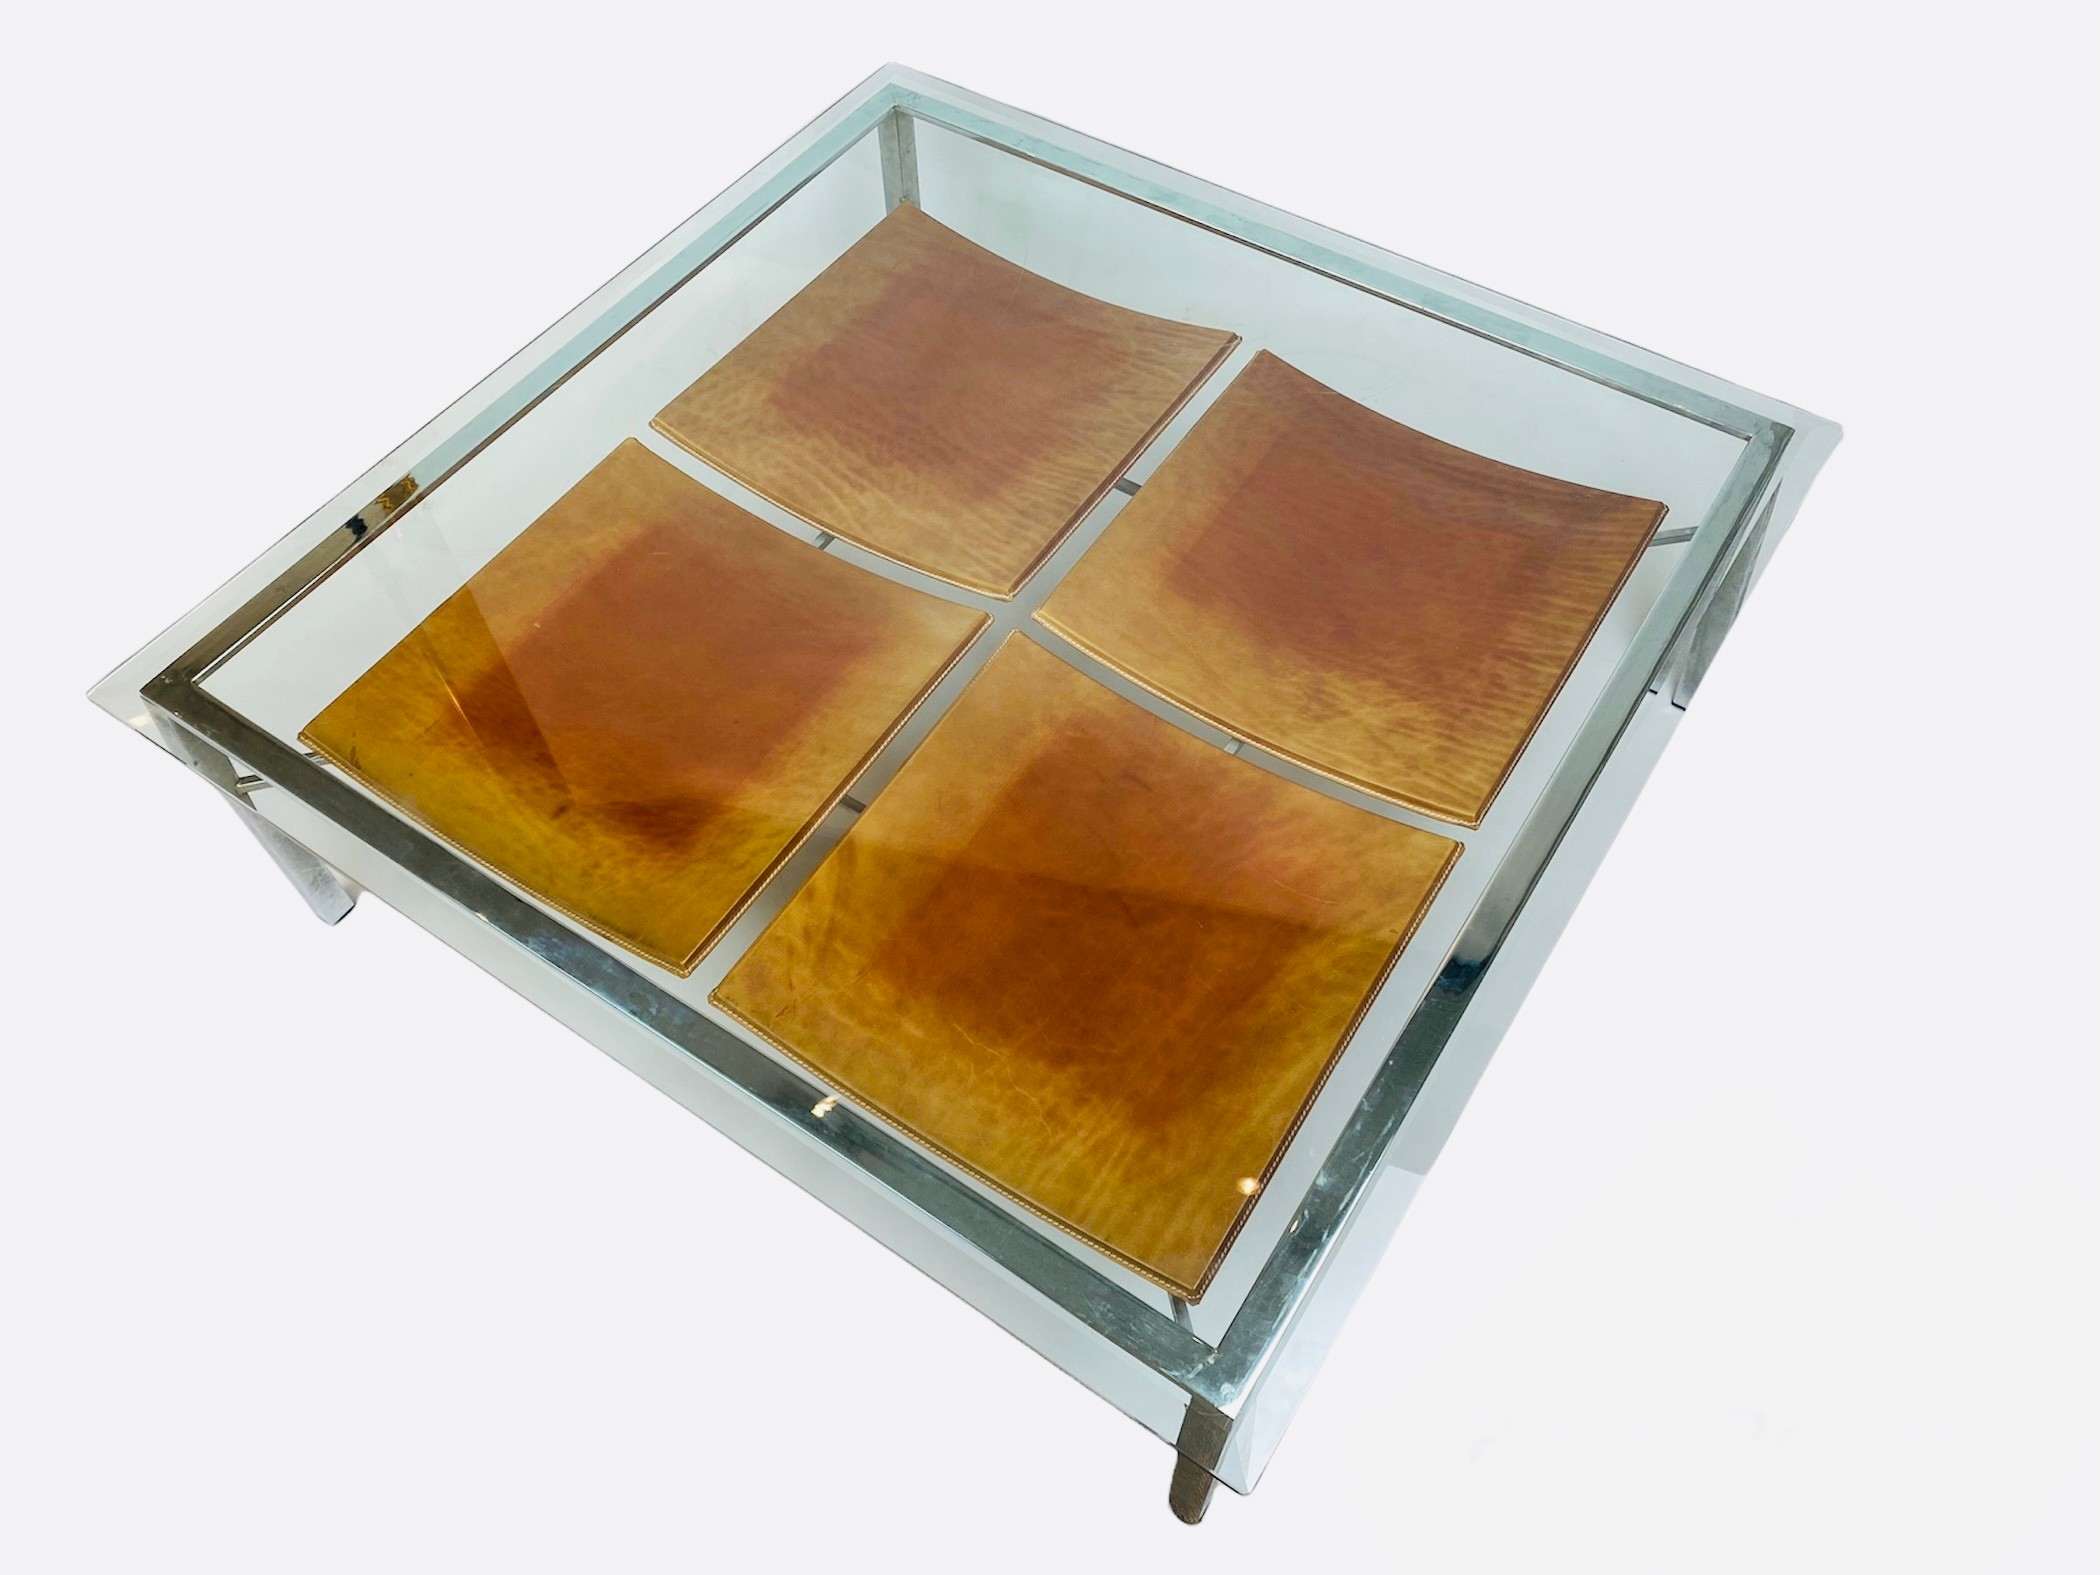 LOW TABLE, 36cm H x 106cm x 106cm, 1970's, square bevelled glass top on a chrome base, with a - Image 7 of 7